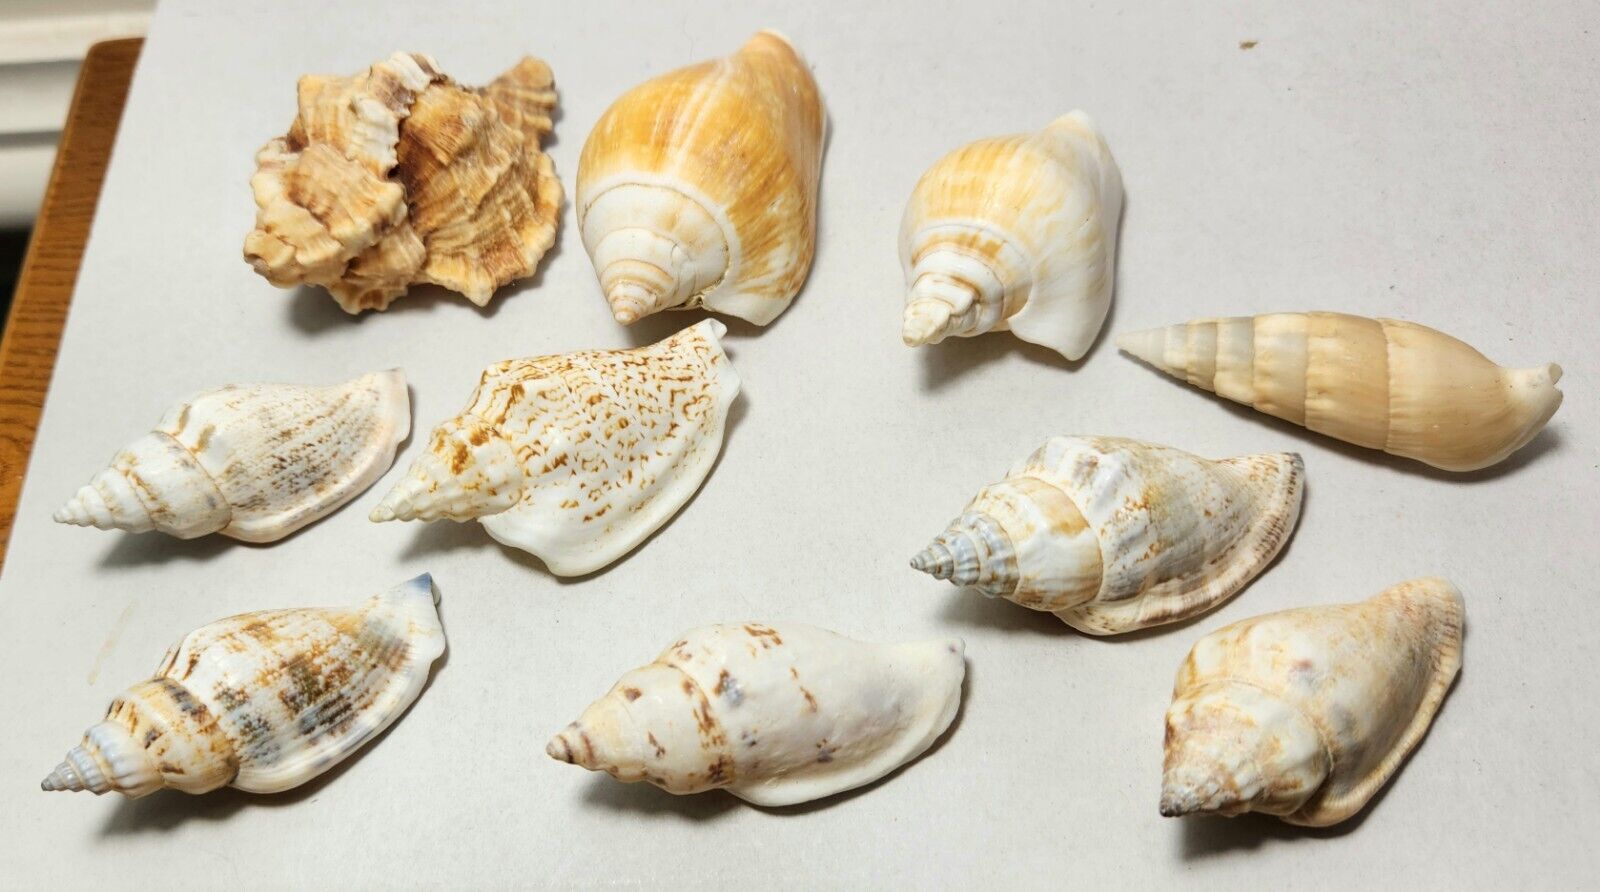 10 Small Conch Shell Seashells from 5 cm-6 cm Orange, Brown, White, Blue 116 gms